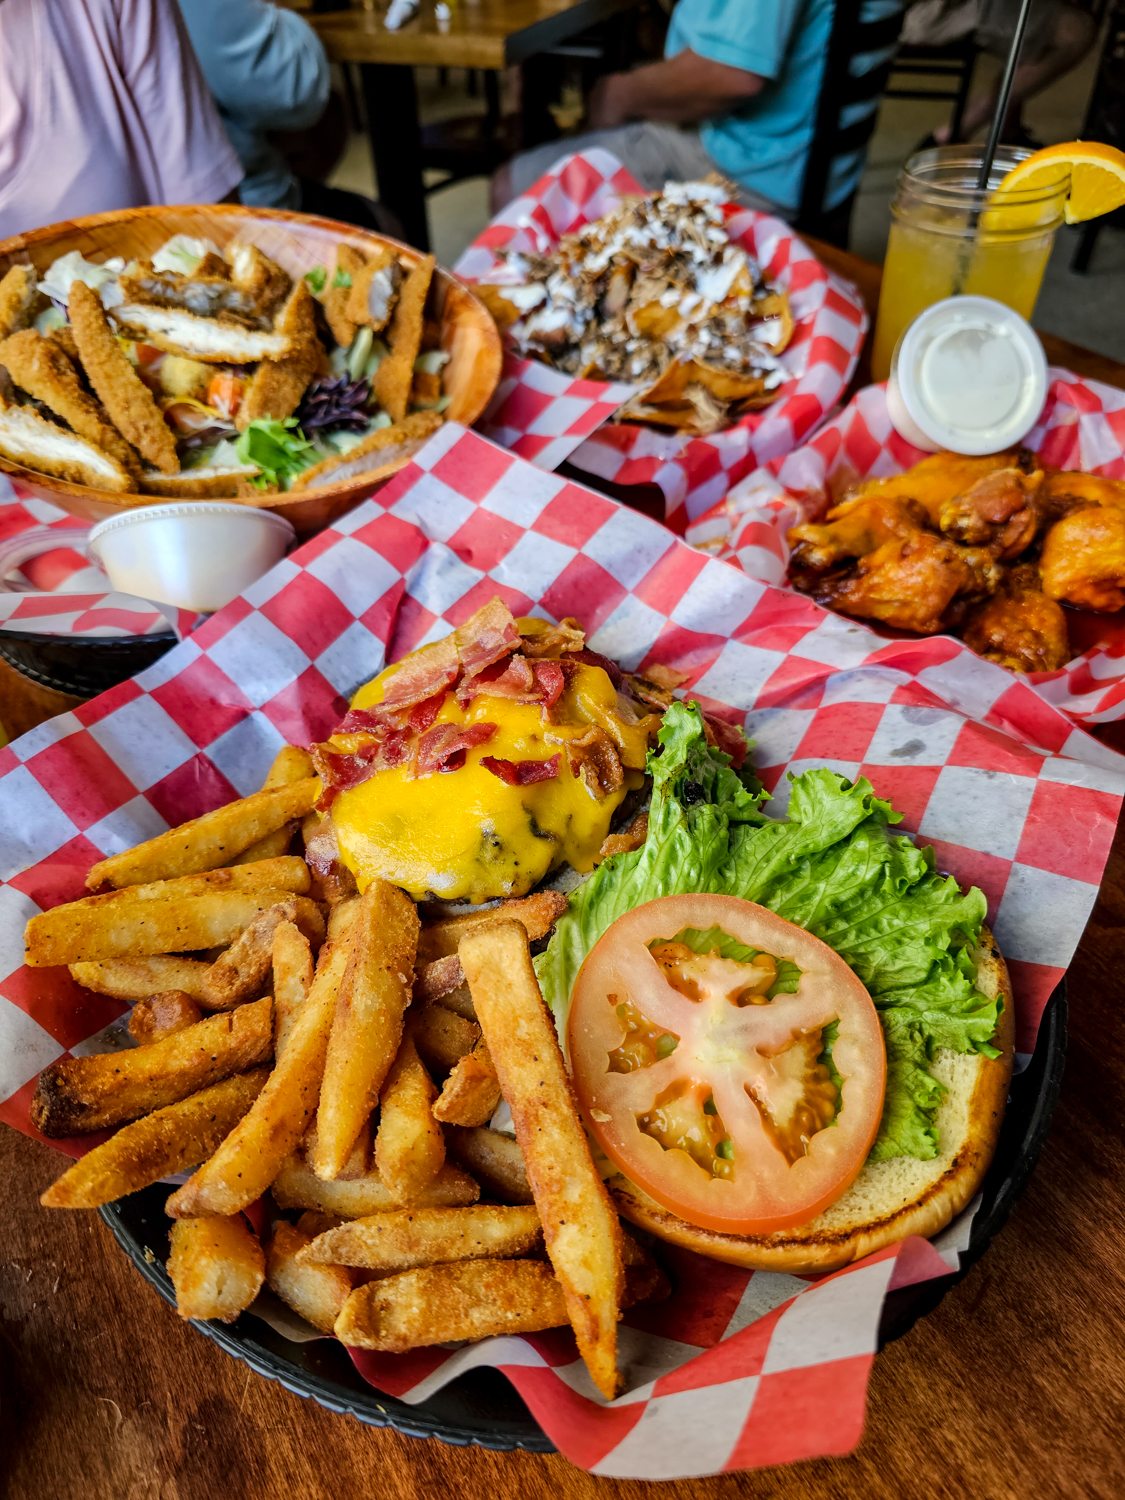 The Cove Pub & Grub Restaurant! Travel Tips for A Visit to Inverness FL. A recap of where we stayed, fun outdoor activities to try, and delicious restaurants for a small-town girls' trip!